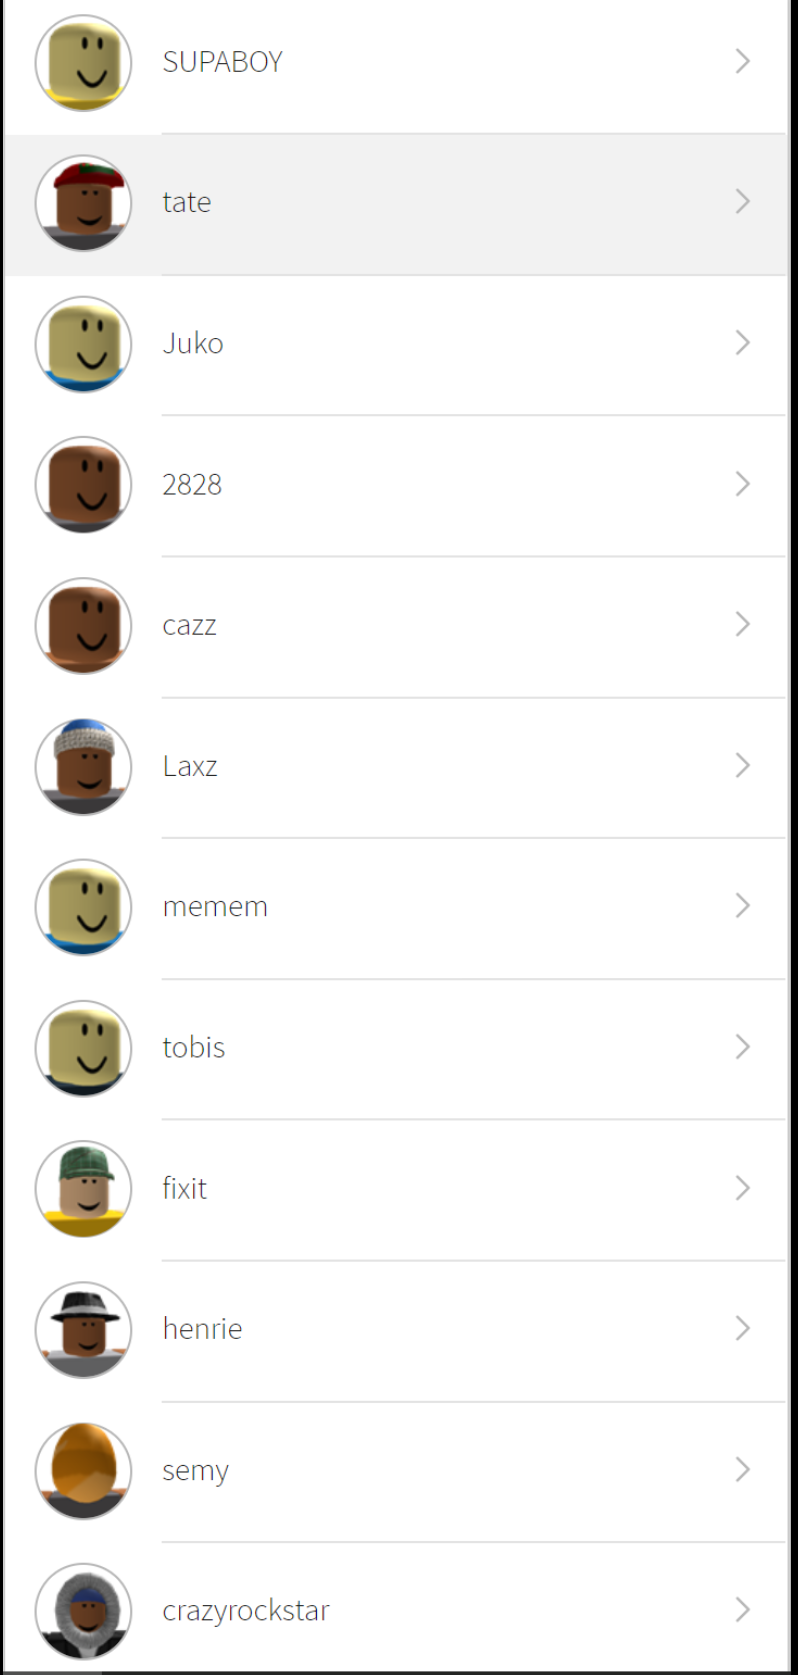 Selling 07 09ers - roblox account selling discord